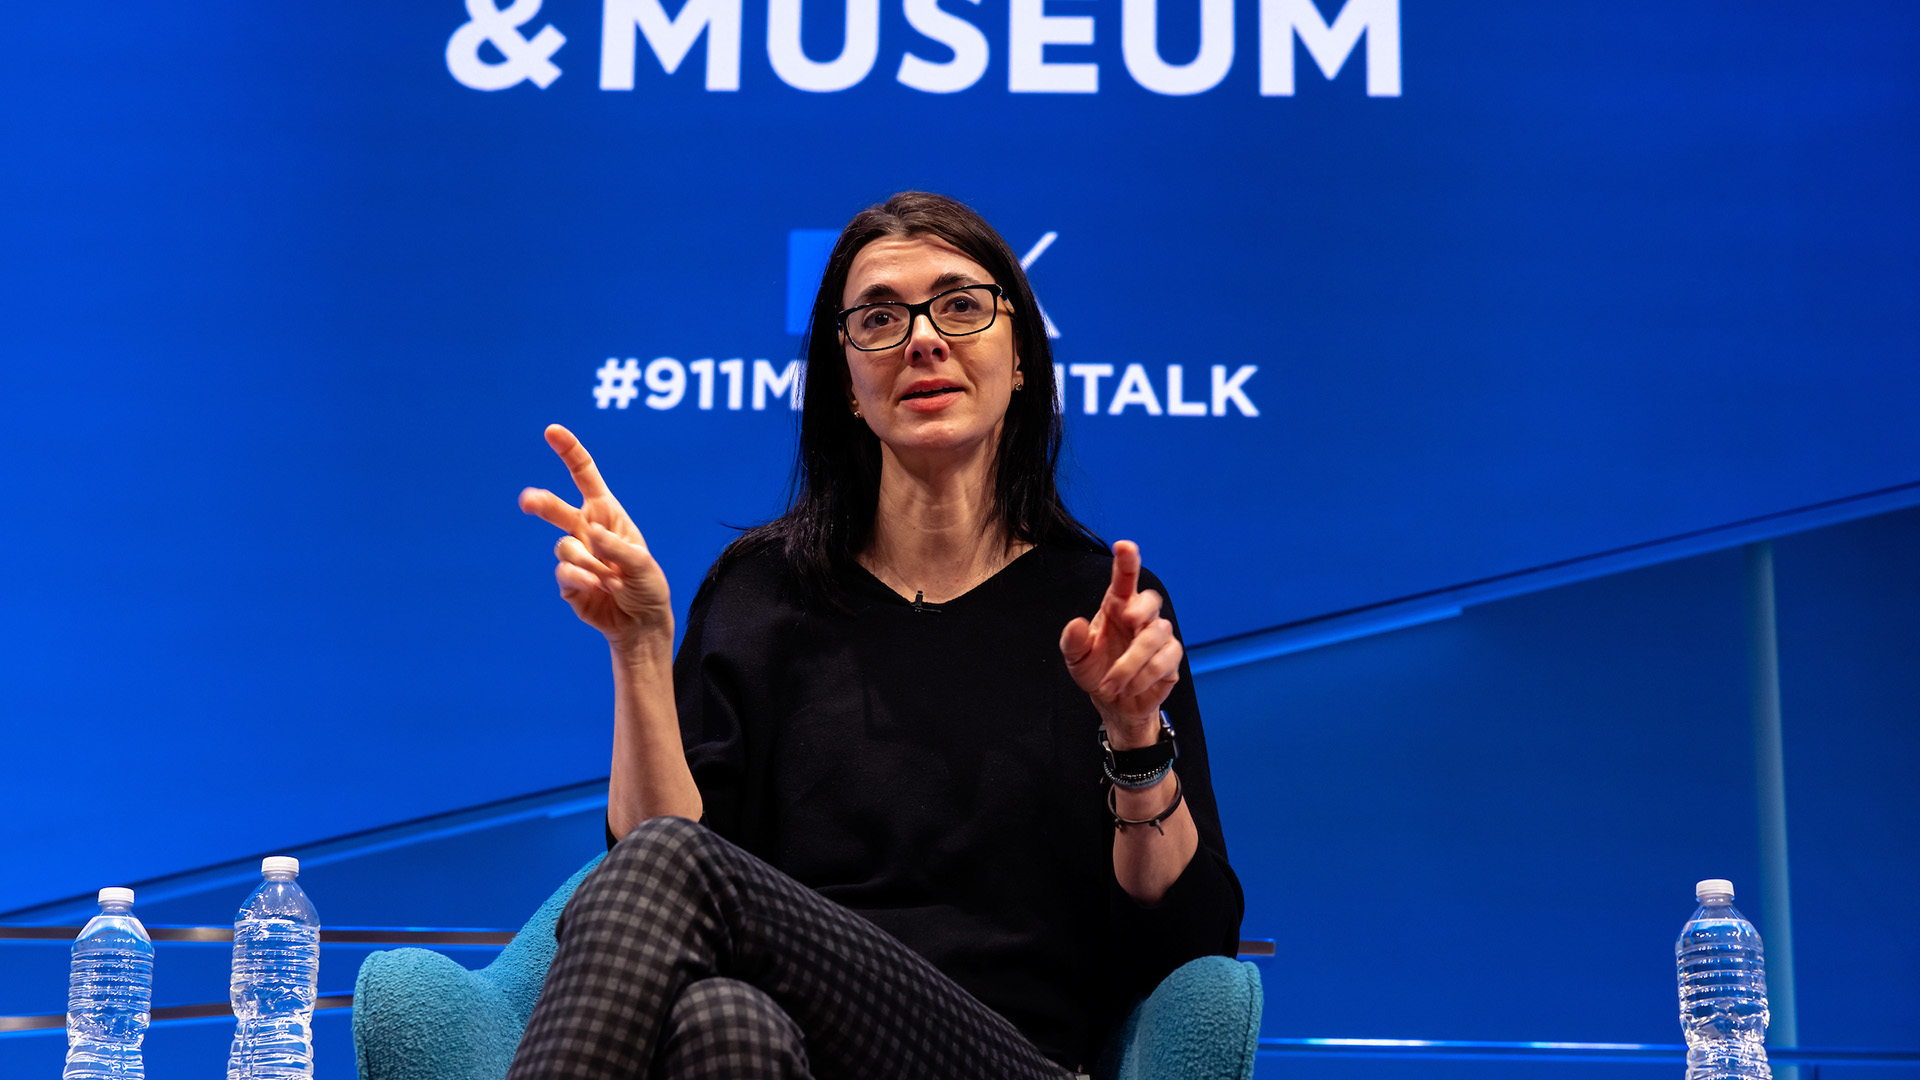 A woman with dark hair and glasses speaks on stage in front of a blue background displaying the 9/11 Memorial and Museum logo.